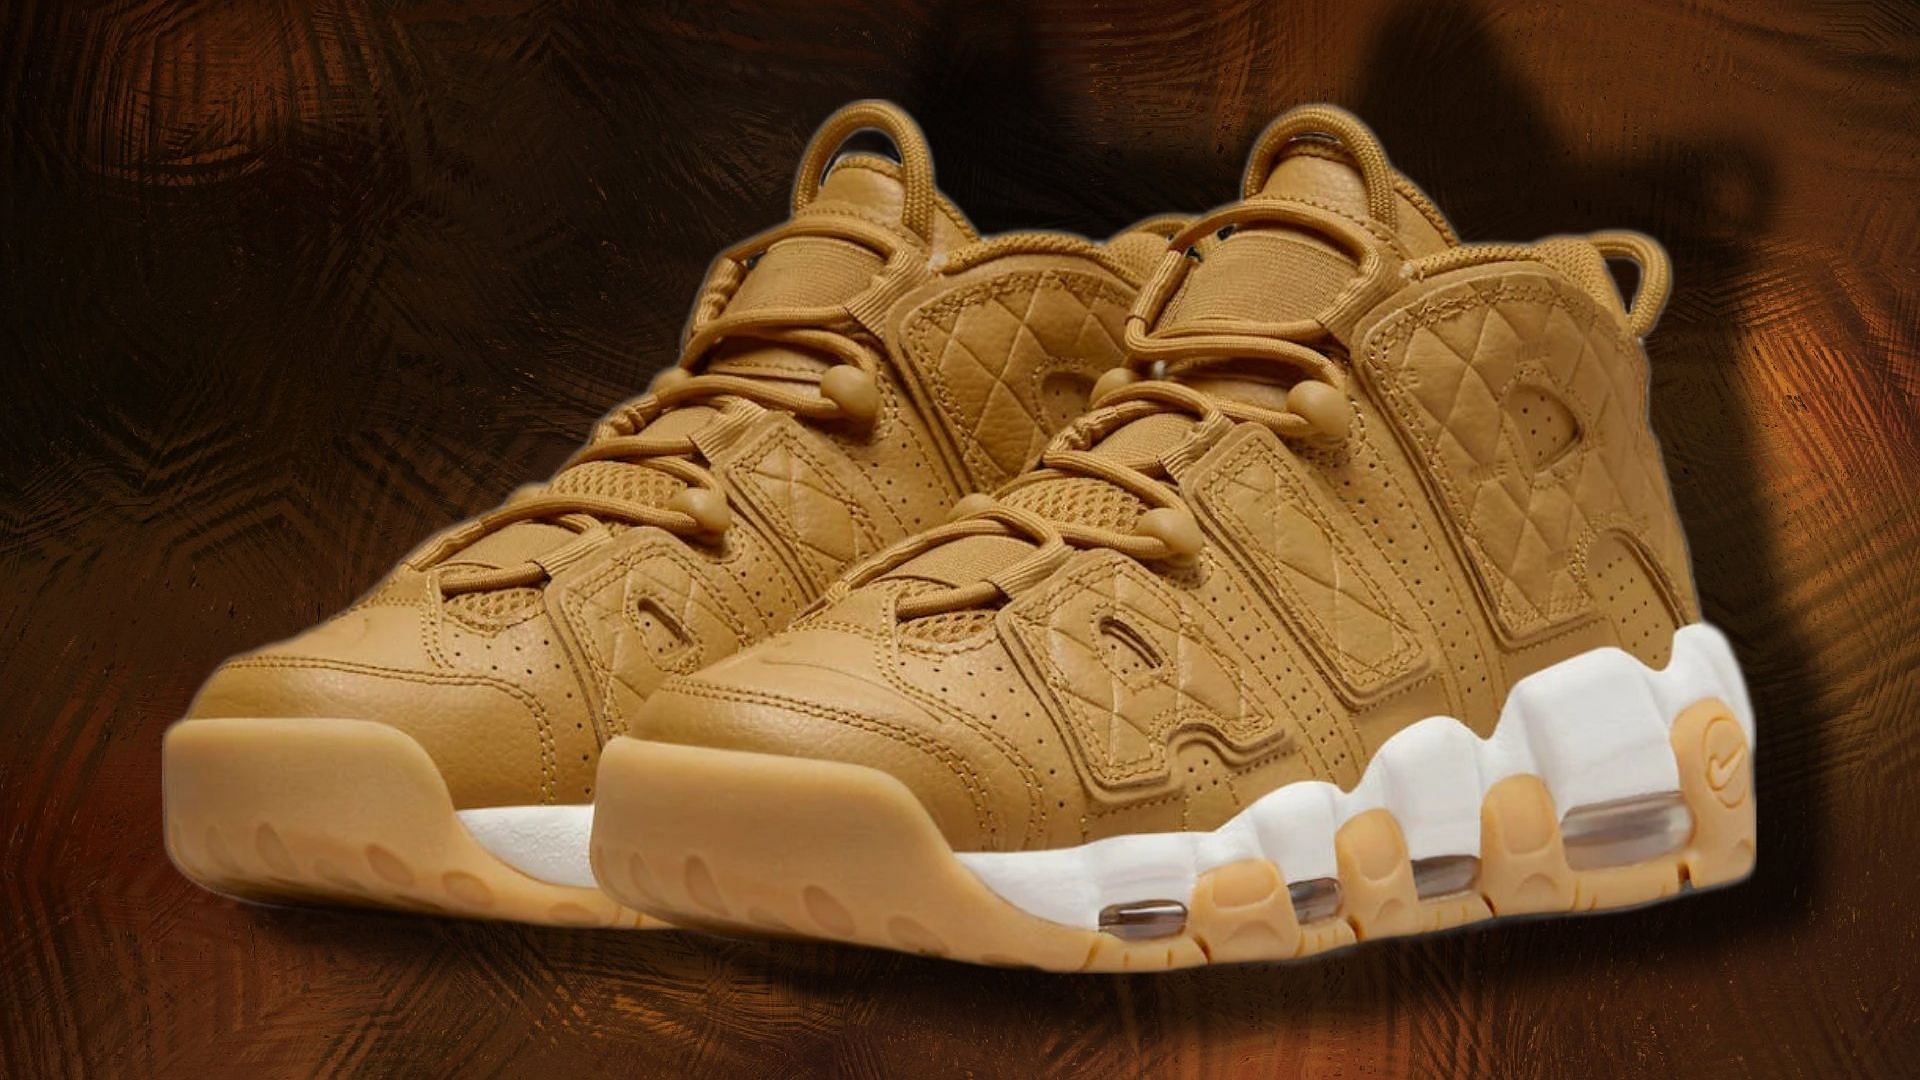 Nike Air More Uptempo Wheat and Gum Light Brown colorway (Image via Twitter/fanofbasketbal2)